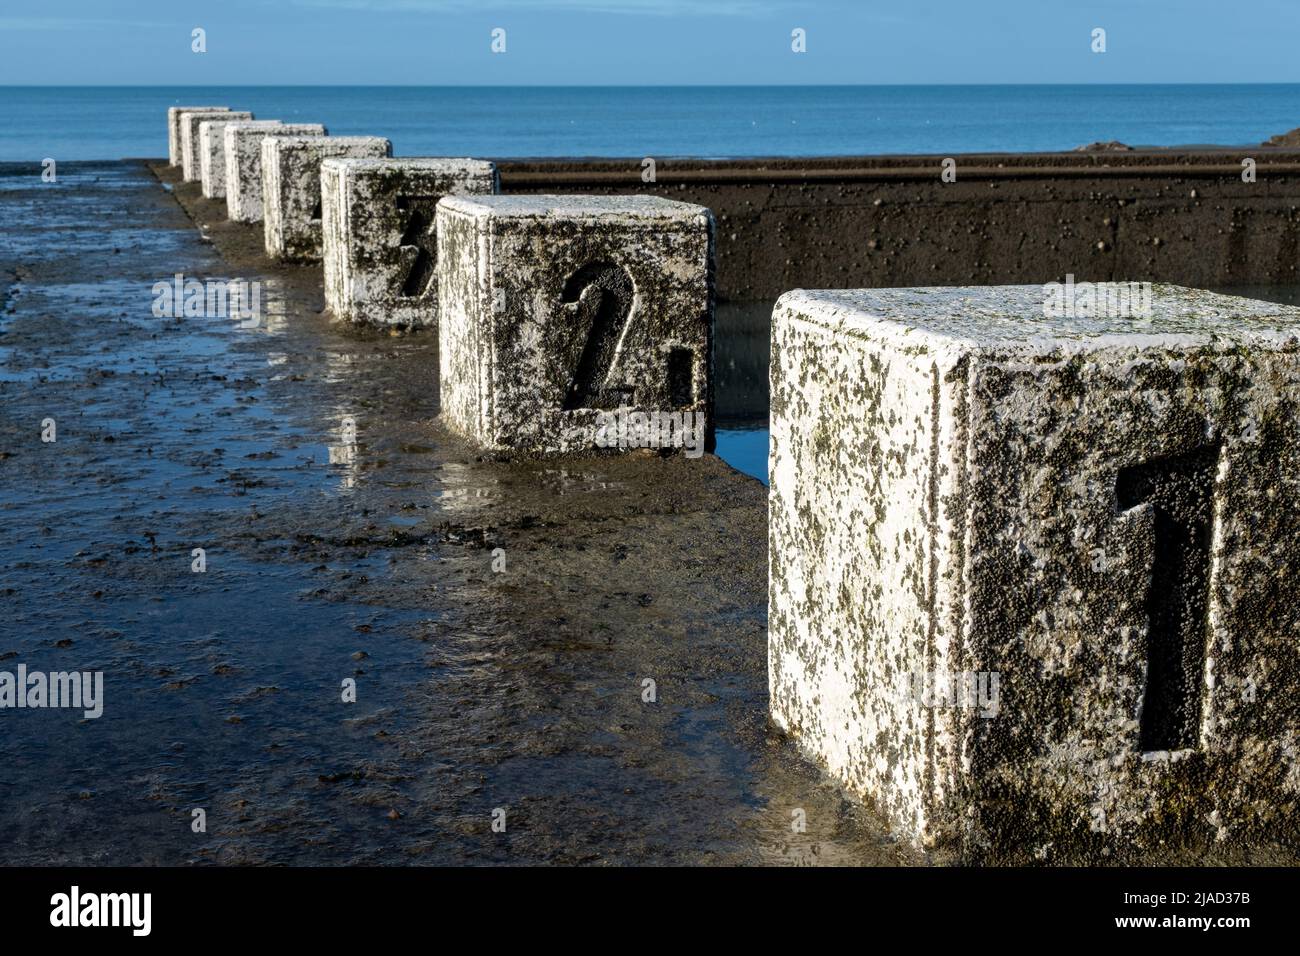 Close-up of a public swimming pool with starting blocks by the sea, France Stock Photo